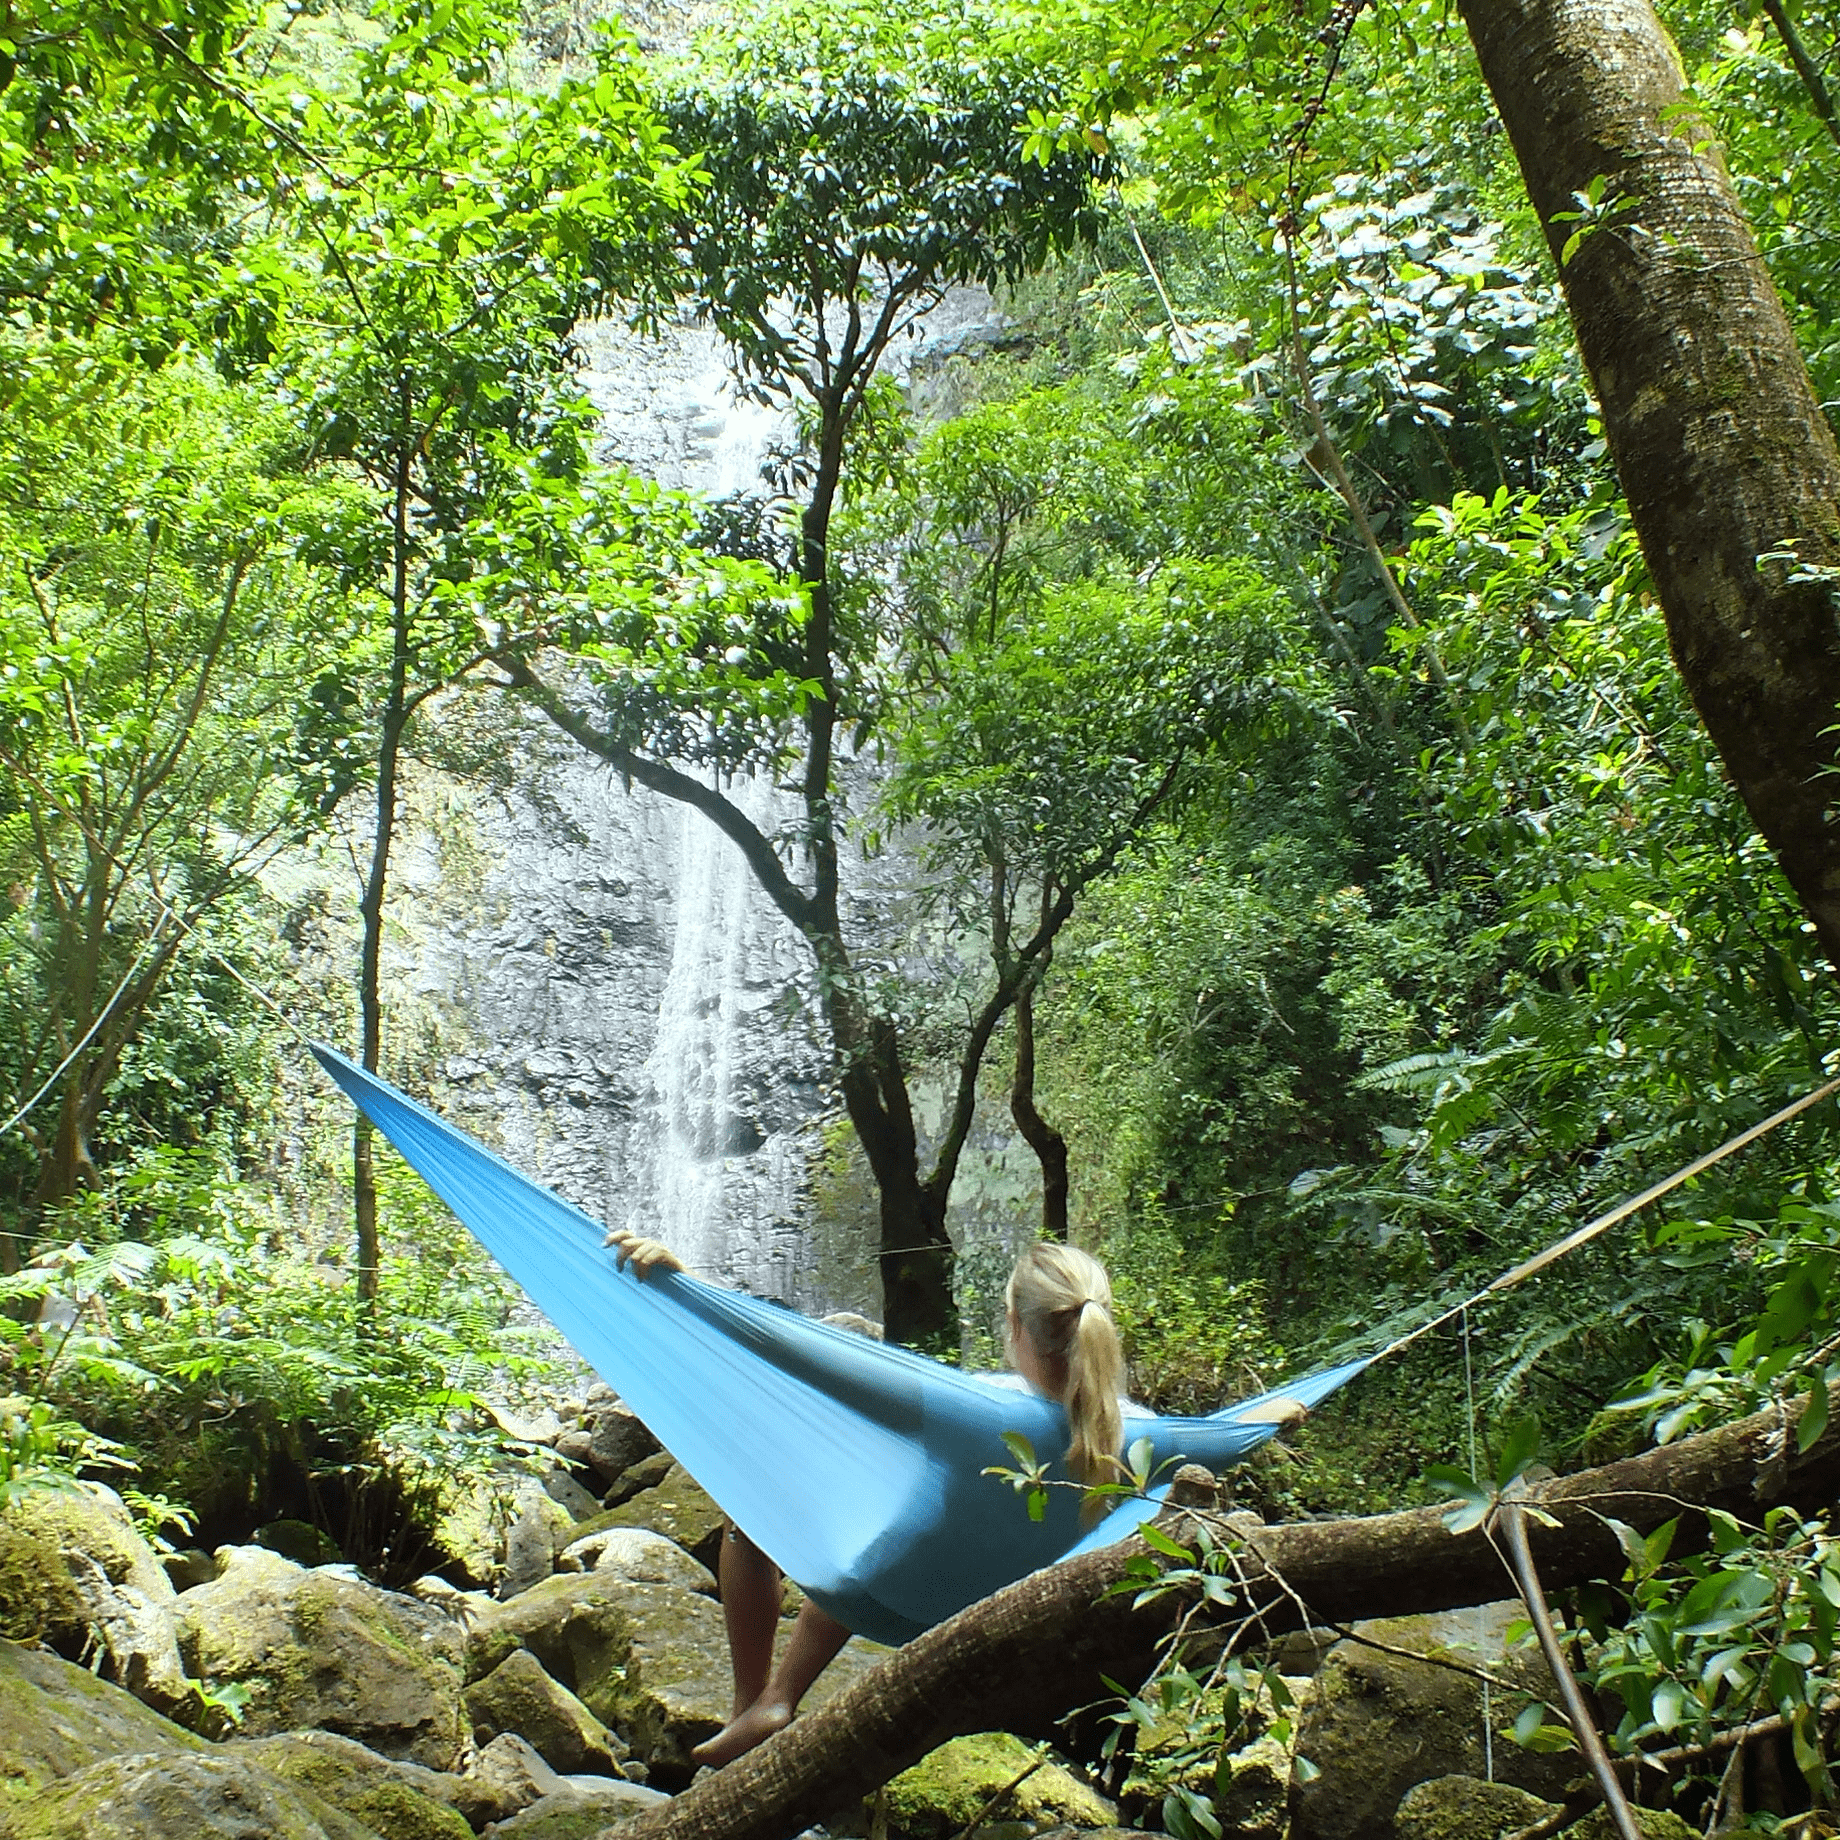 A woman relaxes in a Hummingbird Hammocks Ultralight Single Hammock in a lush forest, facing a large waterfall surrounded by rocks and greenery.